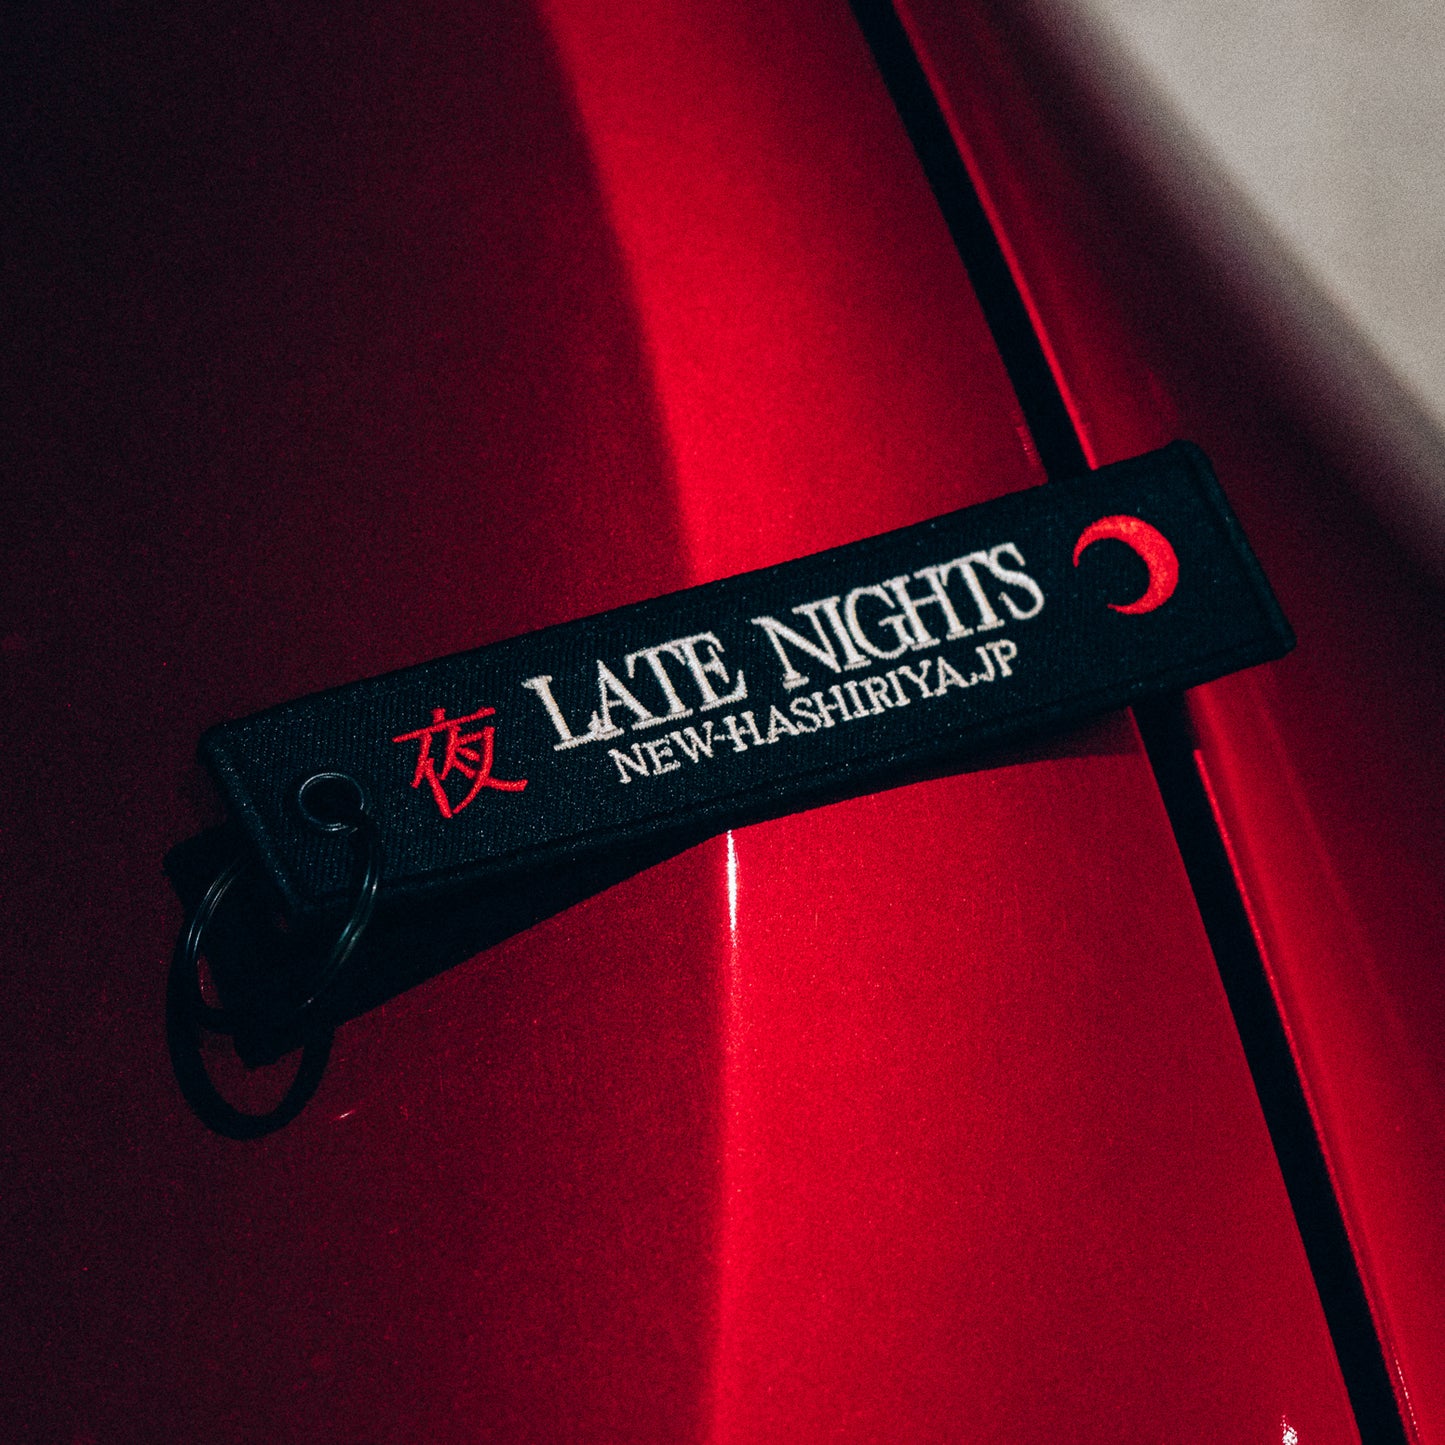 [𝙎𝙊𝙇𝘿 𝙊𝙐𝙏] 'Late Nights' Jet Tag